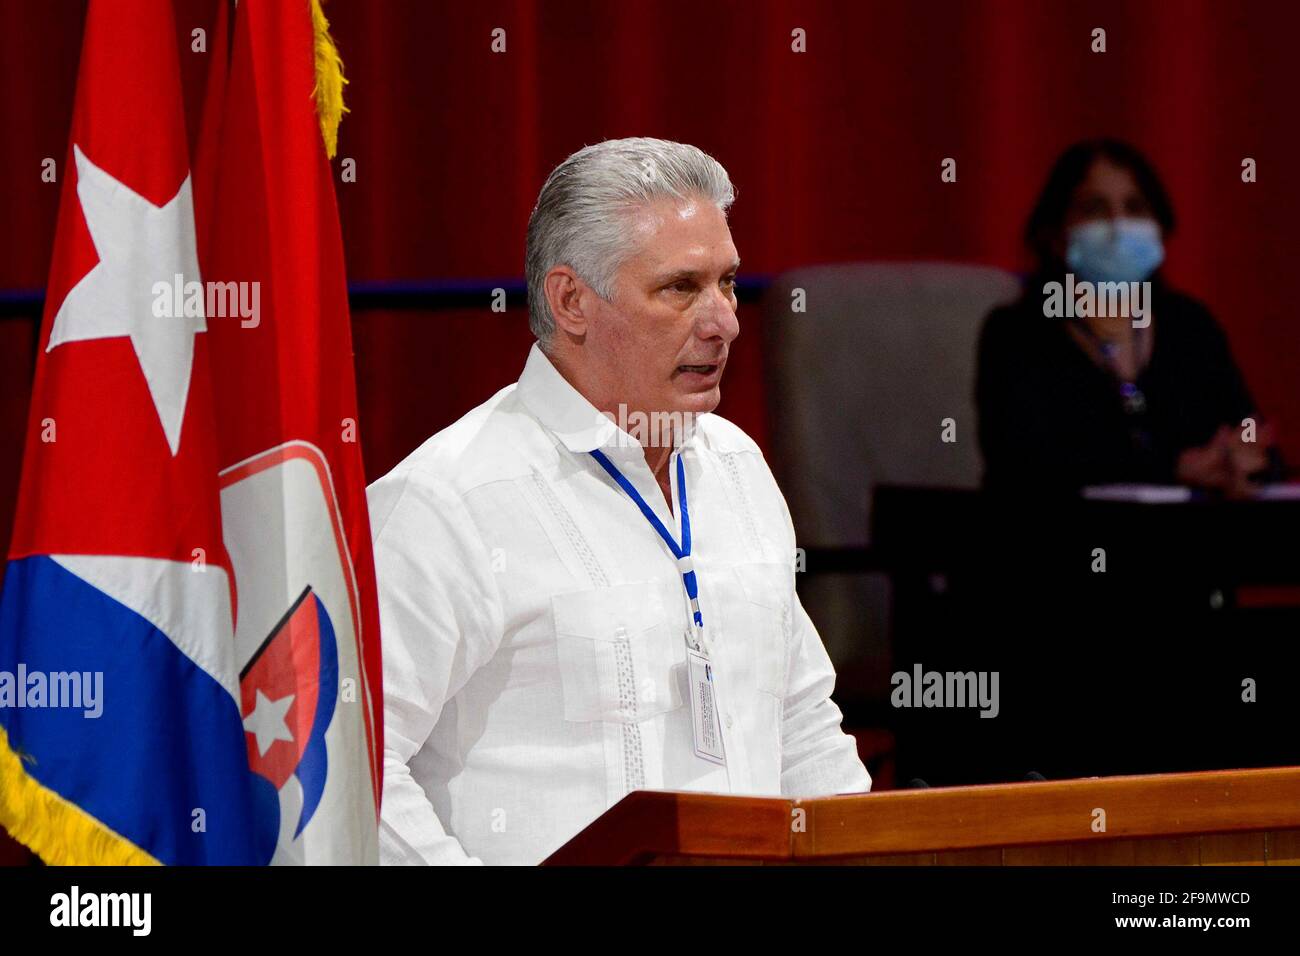 (210420) -- HAVANA, April 20, 2021 (Xinhua) -- Cuban President Miguel Diaz-Canel speaks during the Eighth Congress of the Communist Party of Cuba (PCC) in Havana, Cuba, April 18, 2021. Diaz-Canel was elected Monday the new First Secretary of the PCC Central Committee, as the successor to 89-year-old Raul Castro, local media reported. (Prensa Latina via Xinhua) Stock Photo